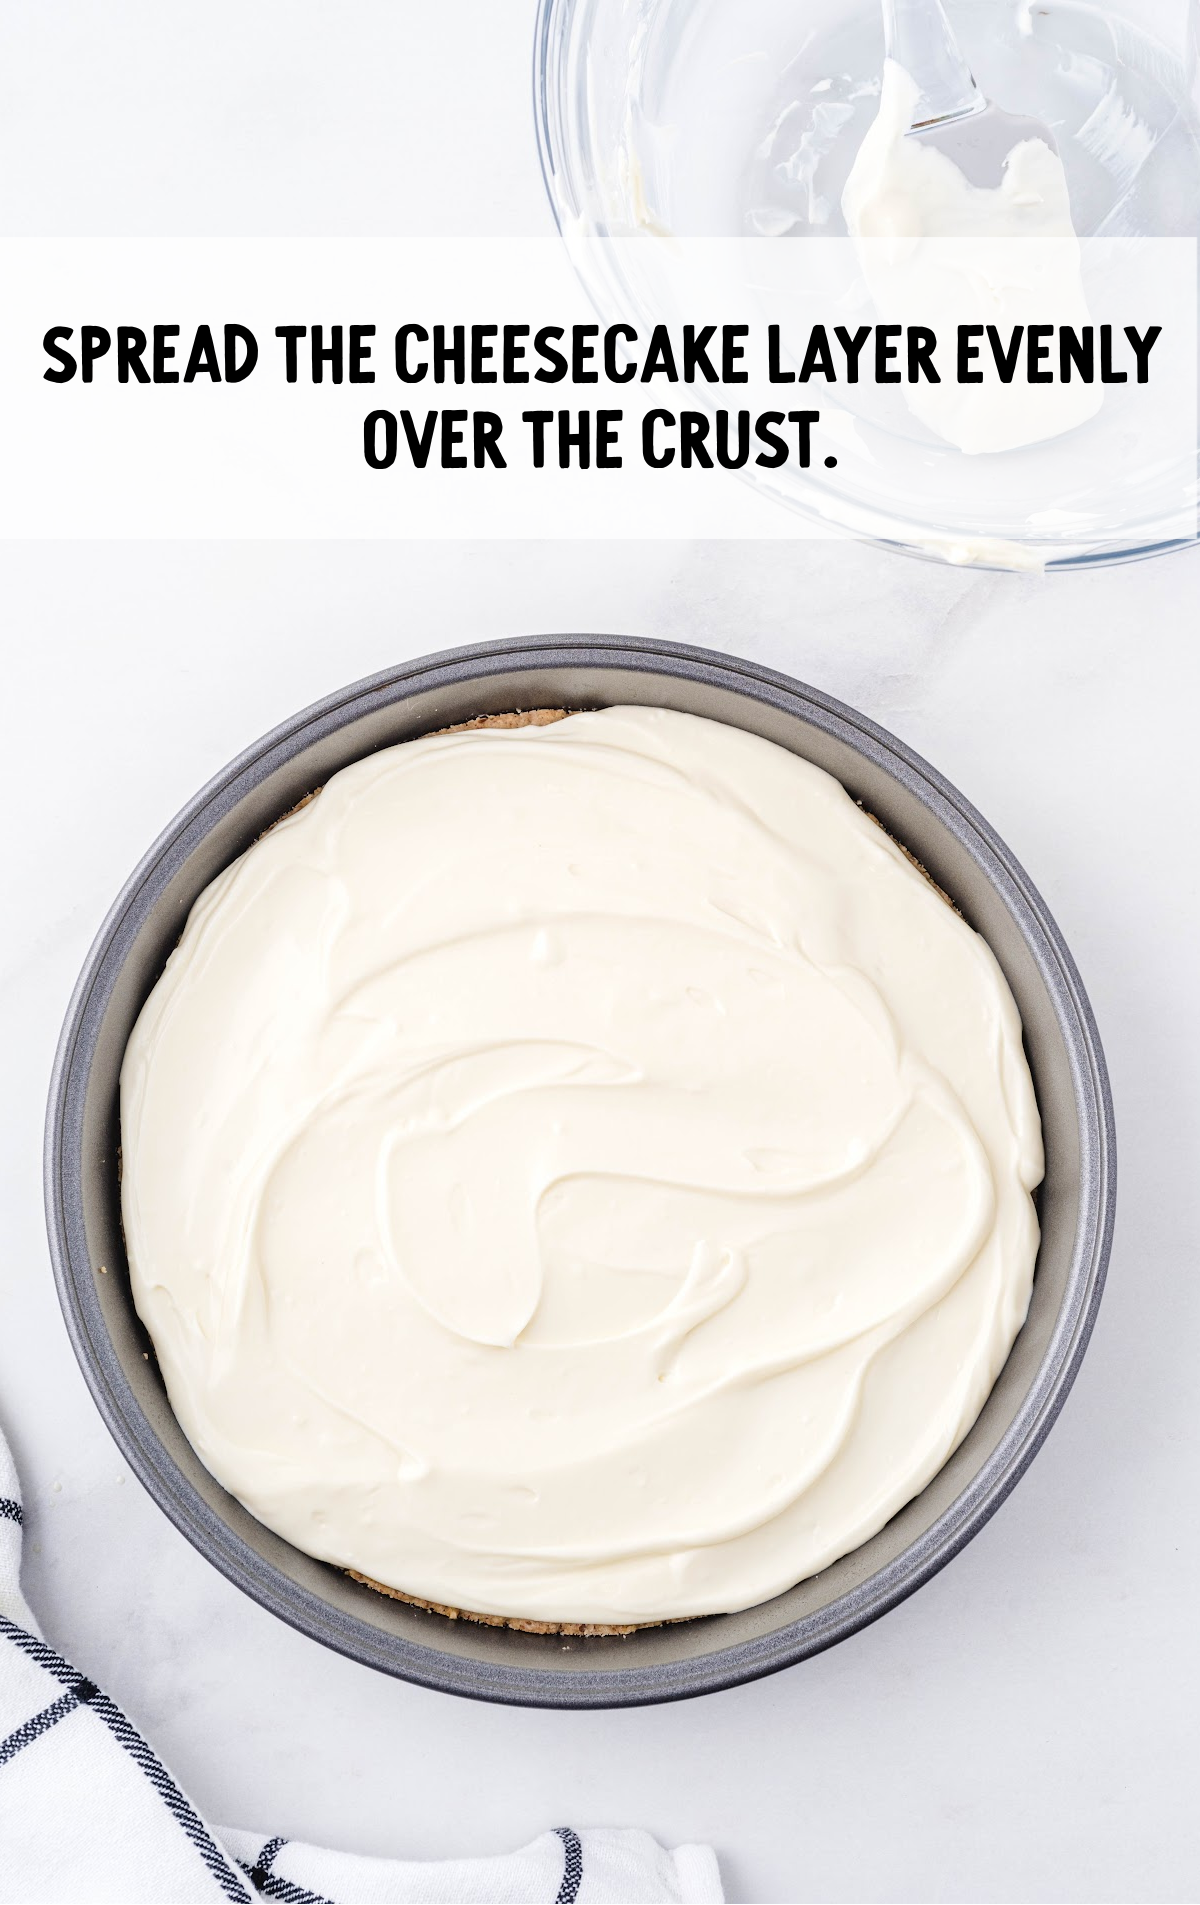 cheesecake layer spread evenly over crust in a pan